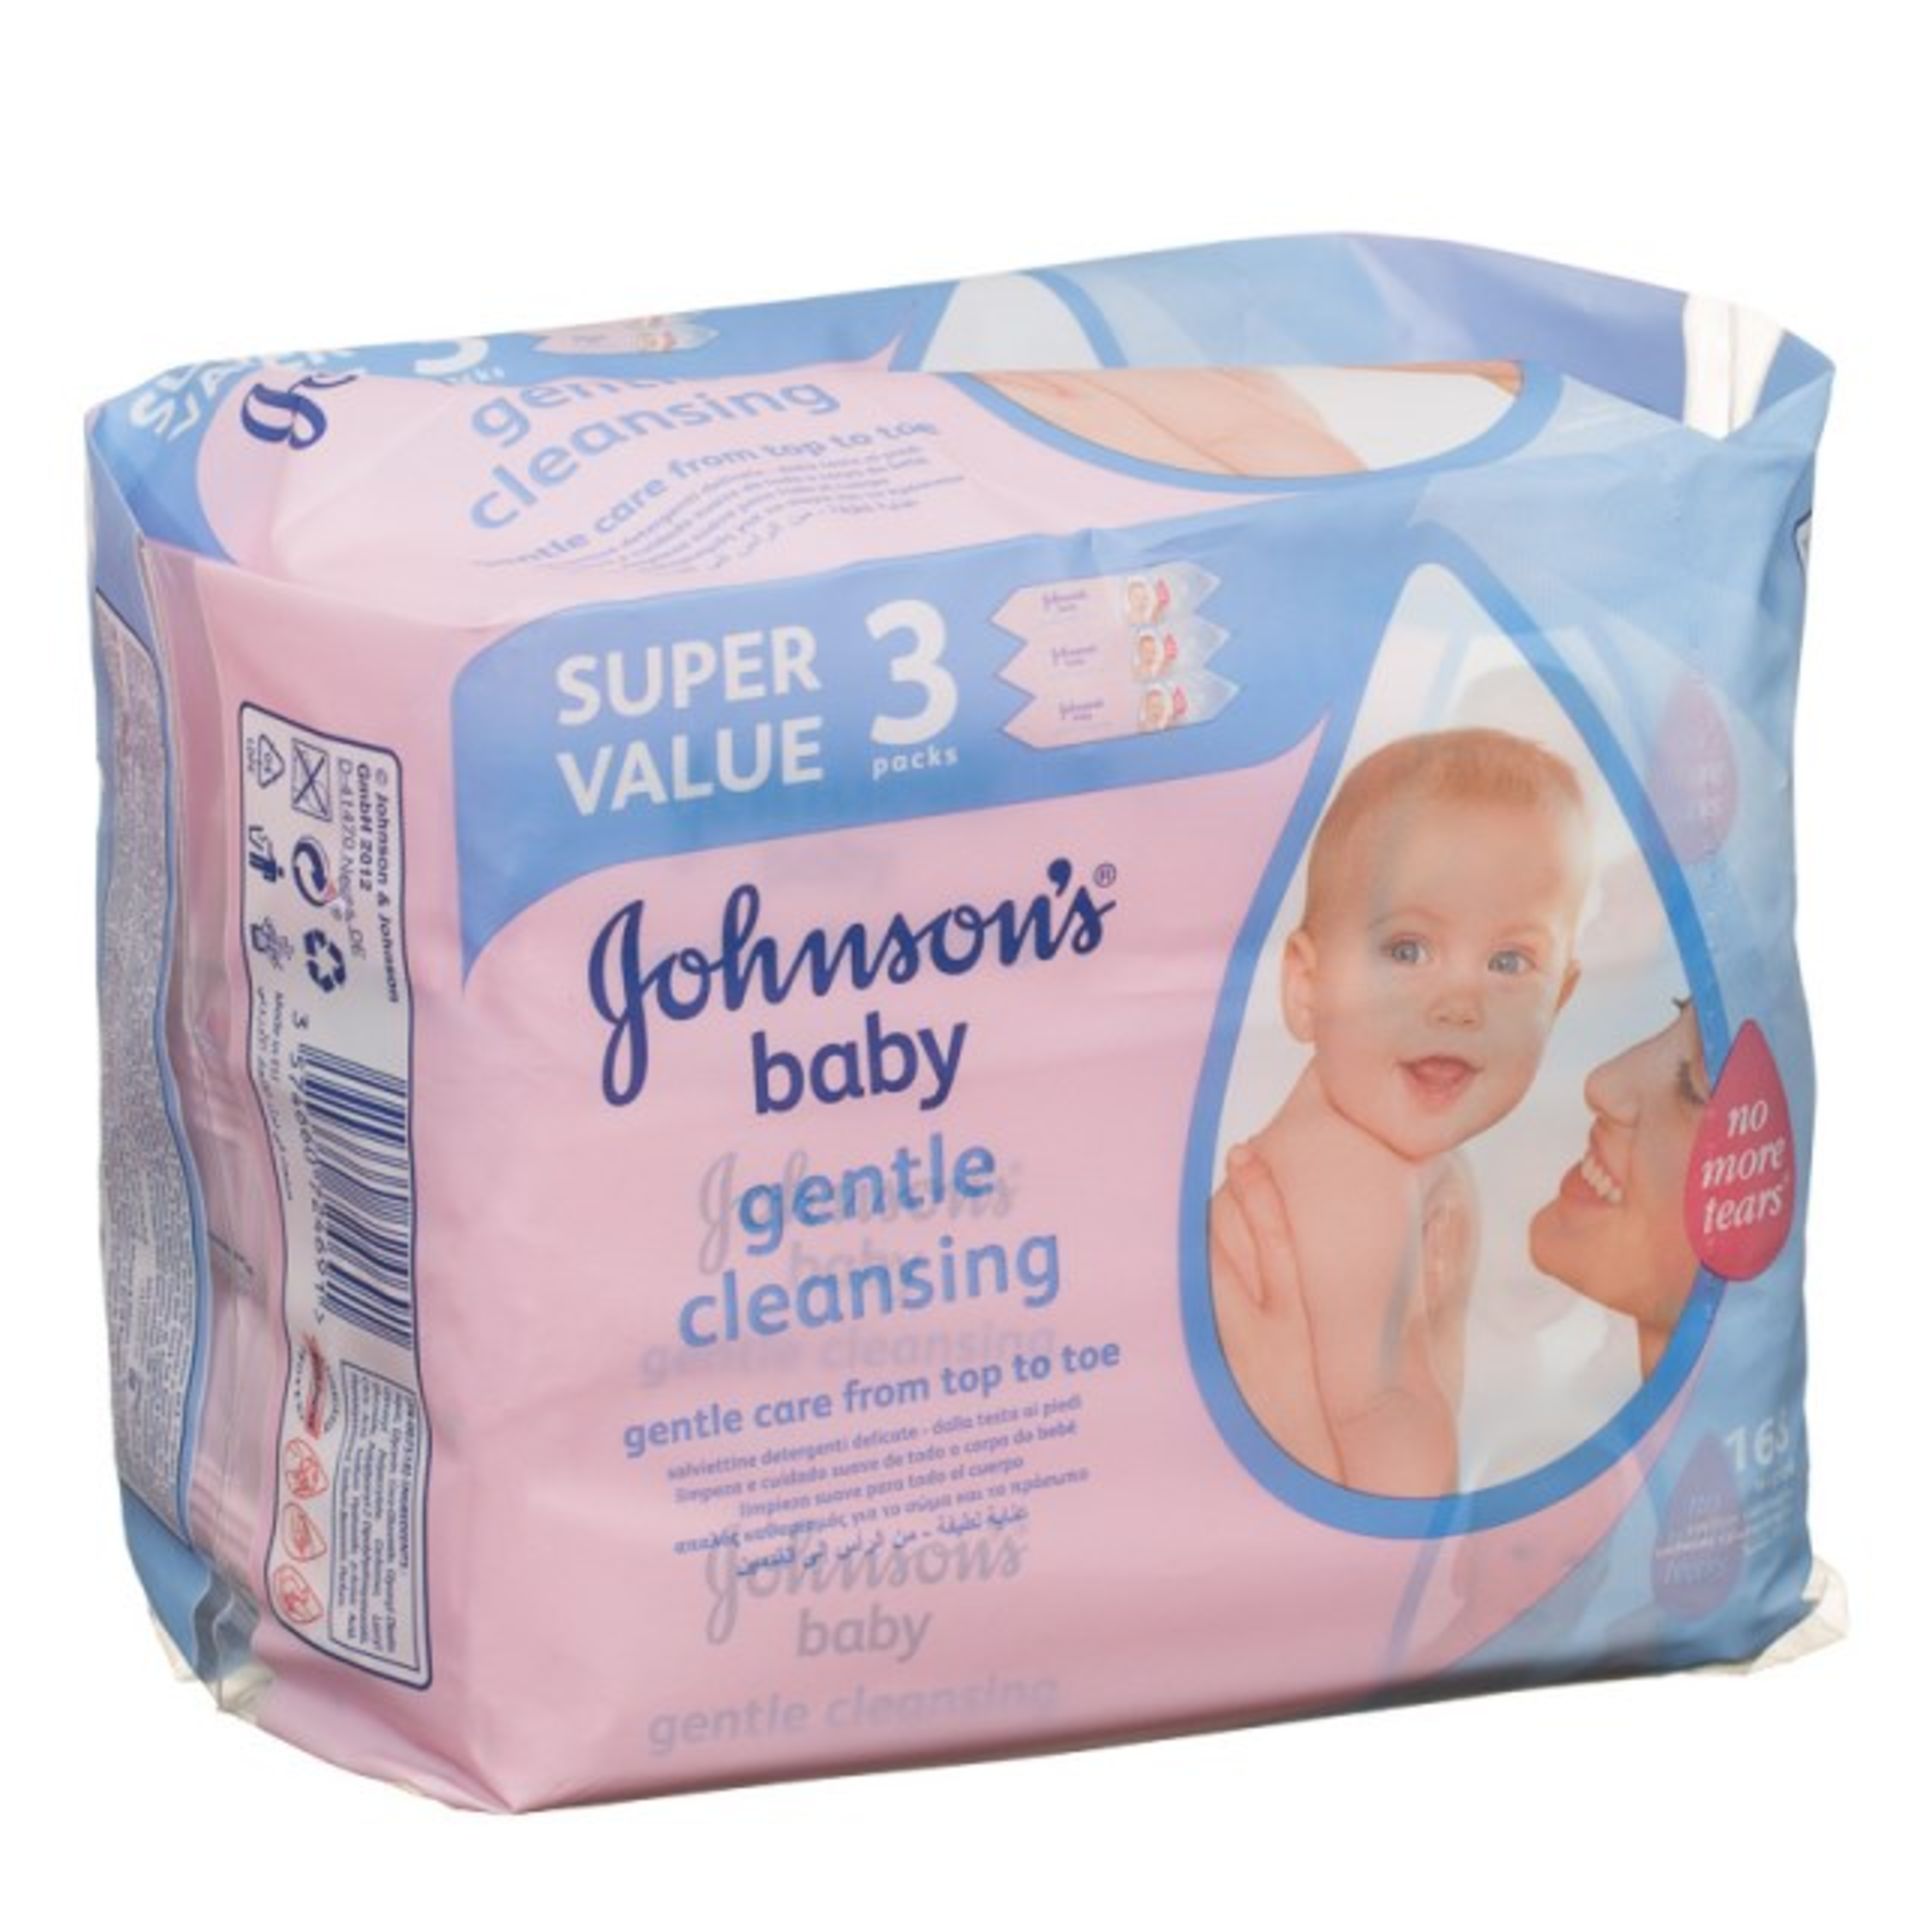 V Brand New 3 Pack Johnsons Baby Gentle Cleansing RRP9.85 X 3 Bid price to be multiplied by Three